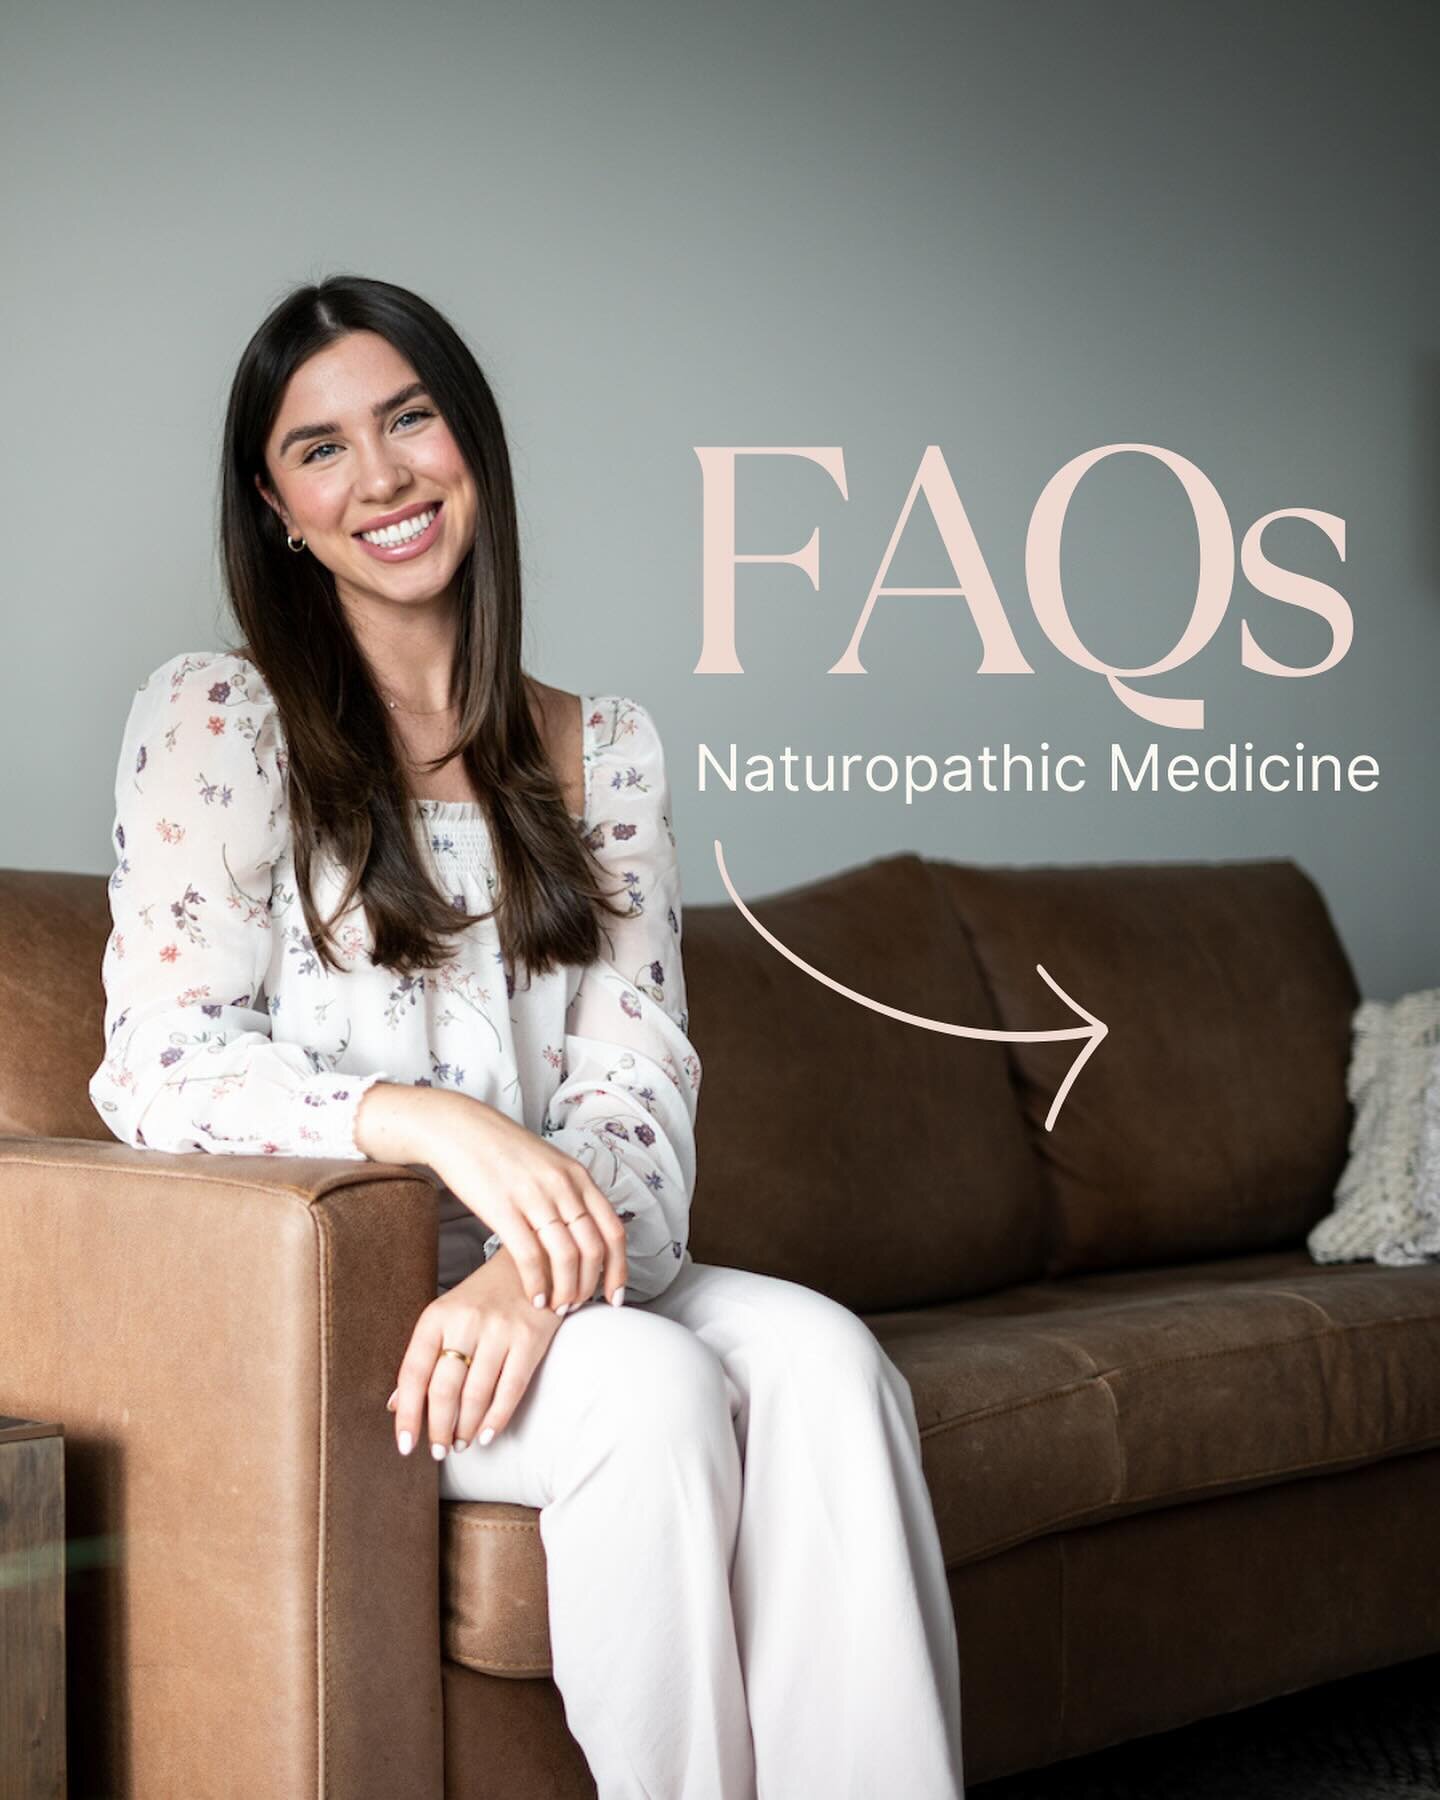 Let&rsquo;s clear up the answers to 5 of the most common Q&rsquo;s I get about naturopathic medicine! 🩺

Swipe through to learn more and reach out if anything is left unanswered 💌